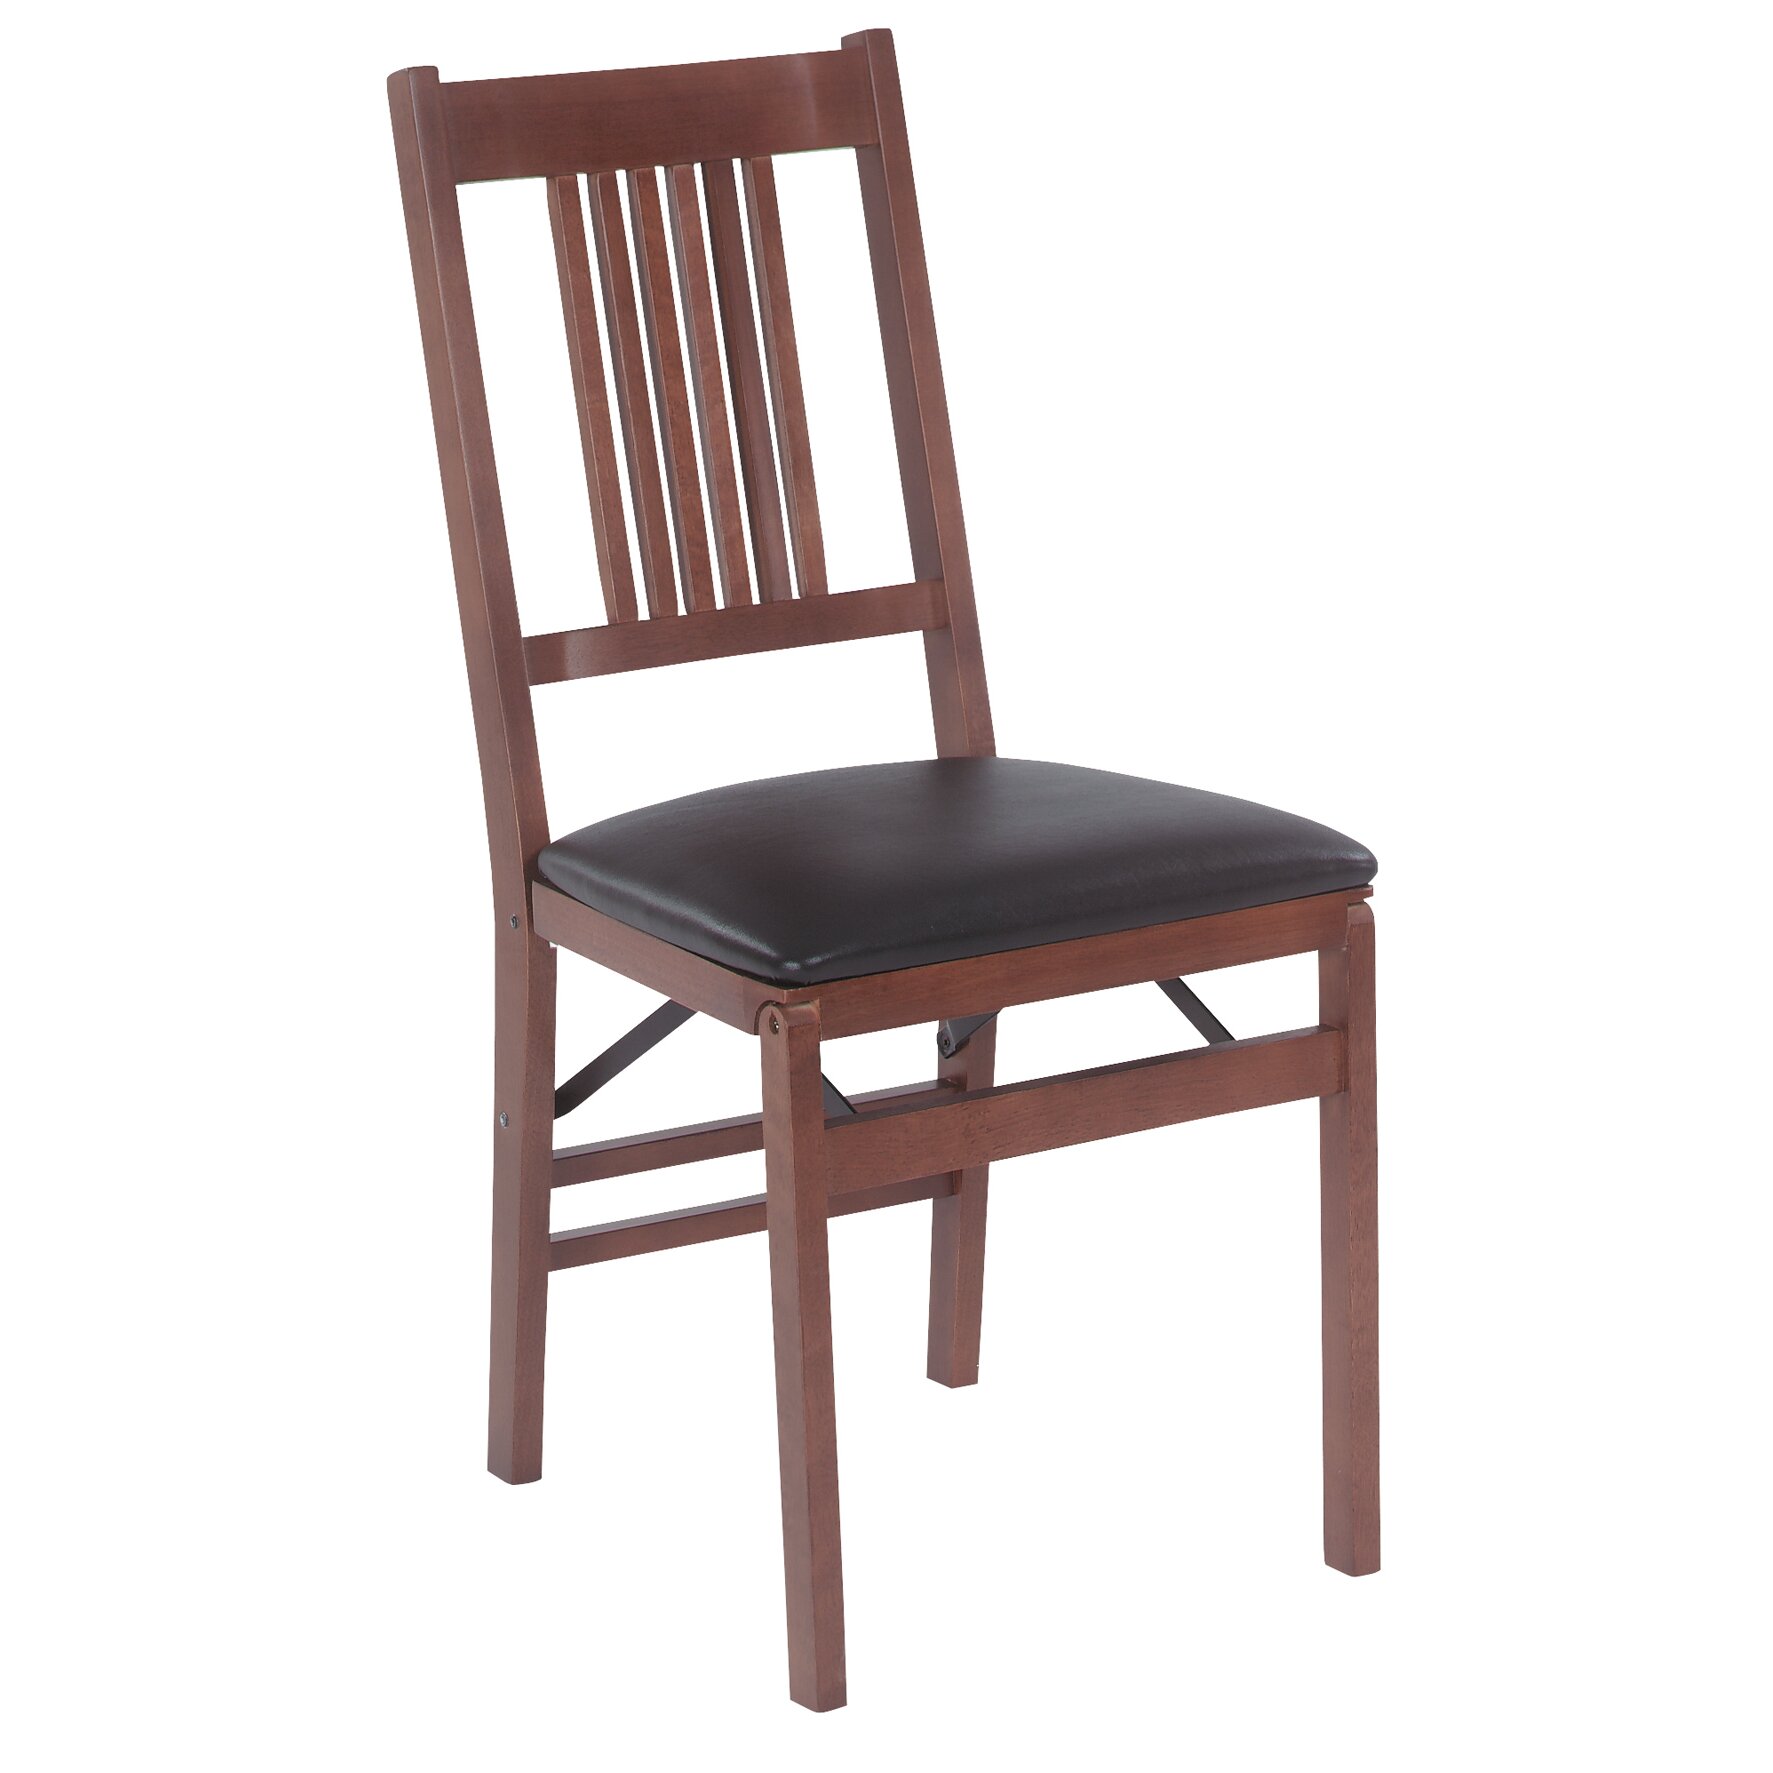 Stakmore True Mission Wood Folding Chair with Vinyl Seat & Reviews